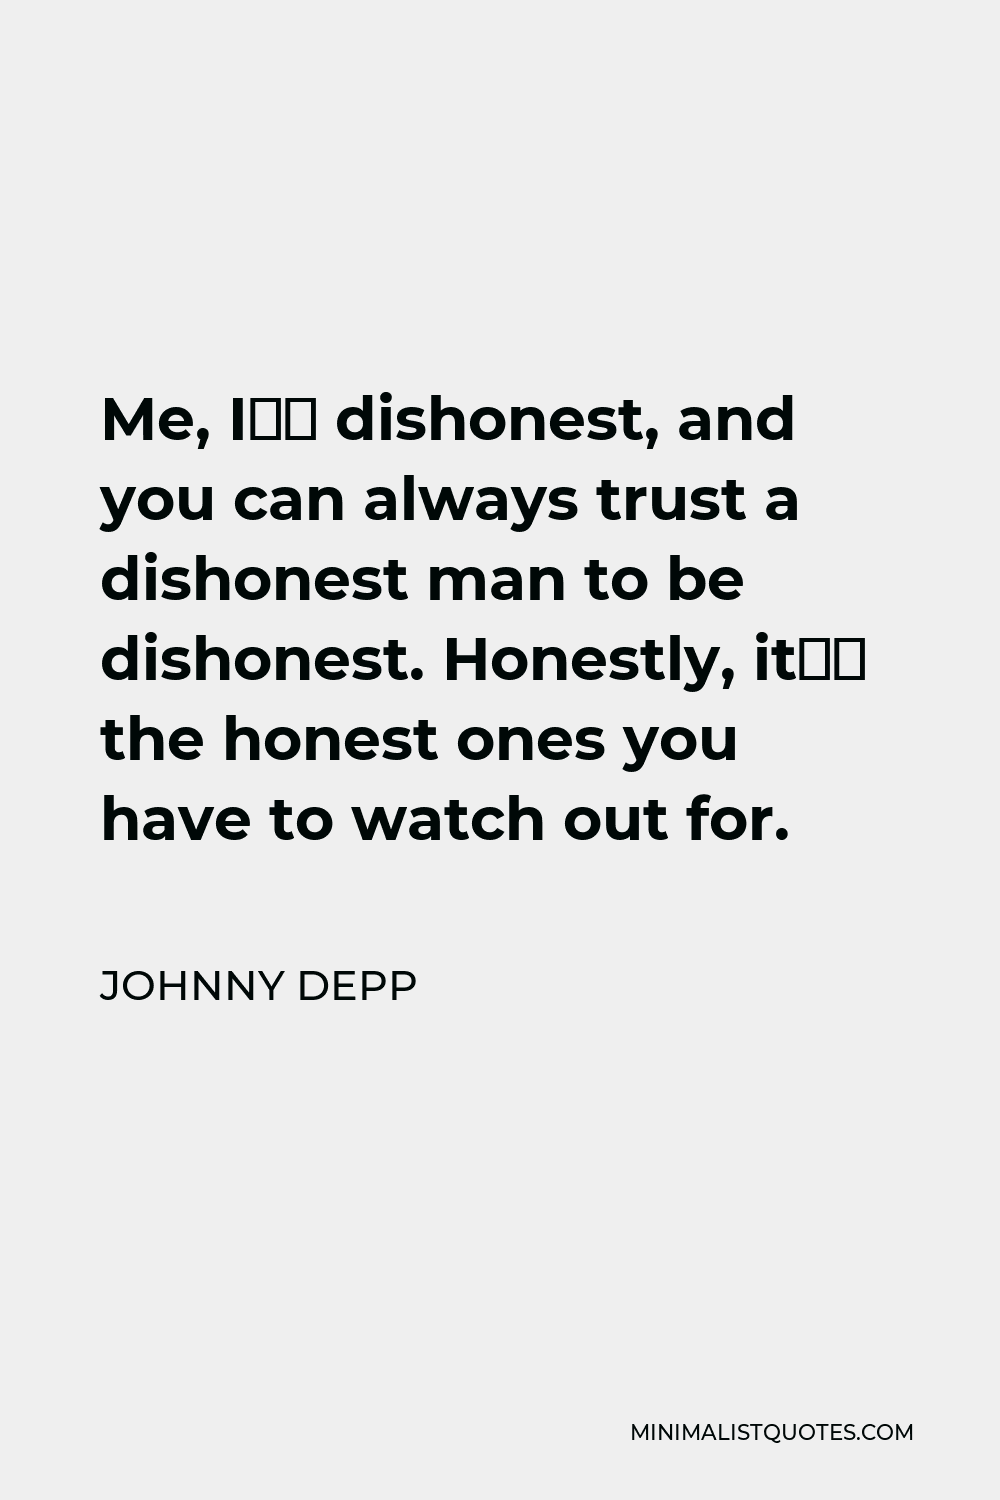 Johnny Depp Quote - Me, I’m dishonest, and you can always trust a dishonest man to be dishonest. Honestly, it’s the honest ones you have to watch out for.